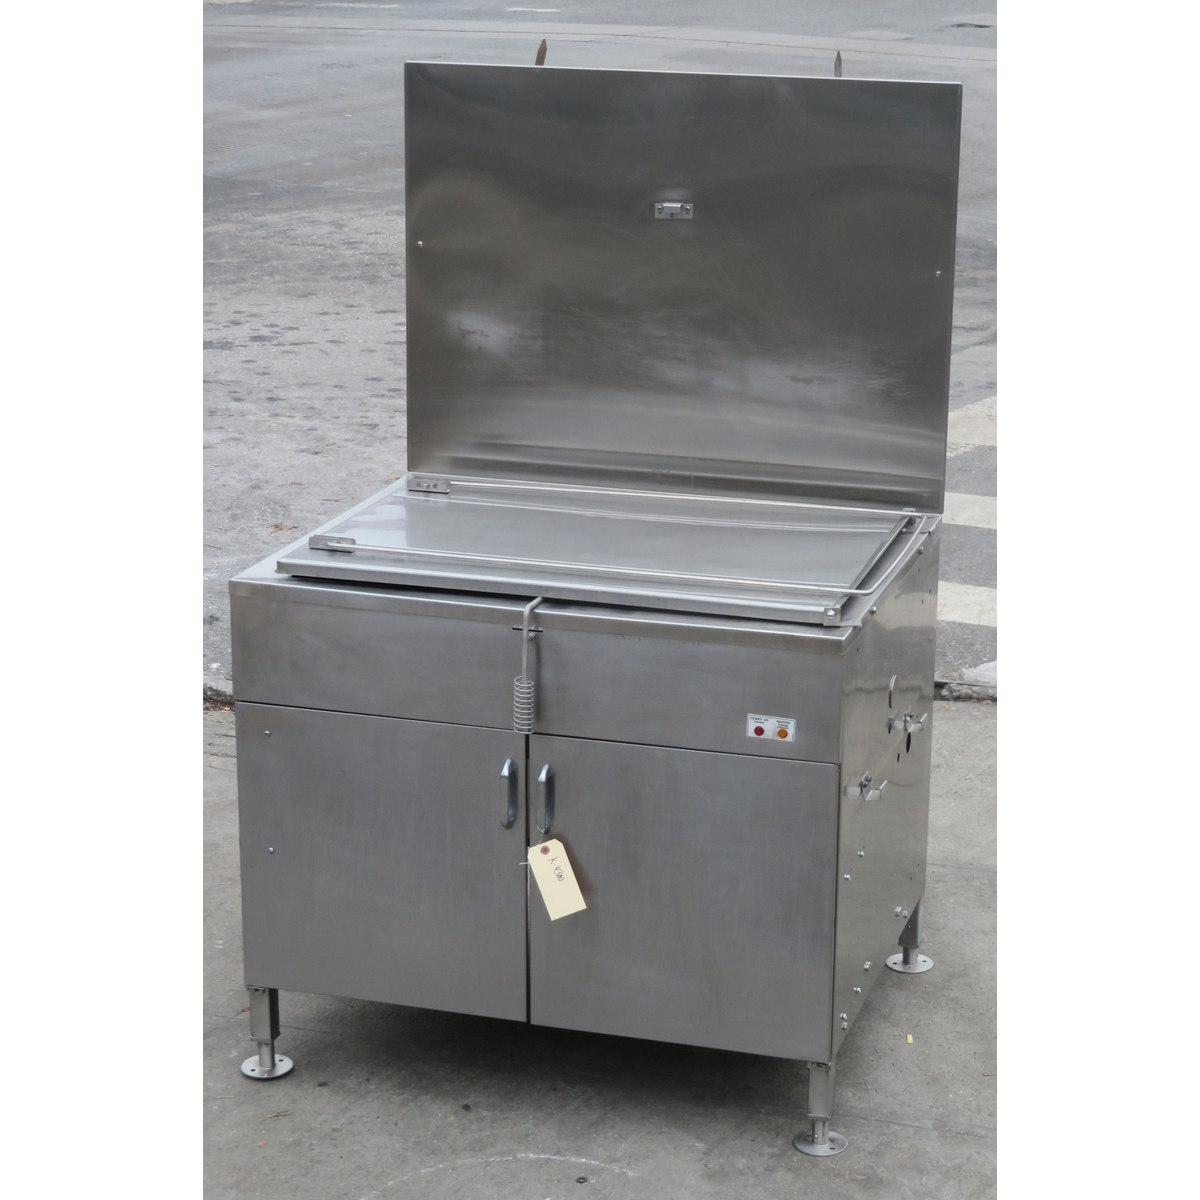 Belshaw 734CG Gas Fryer With Submerger, Used Excellent Condition image 5